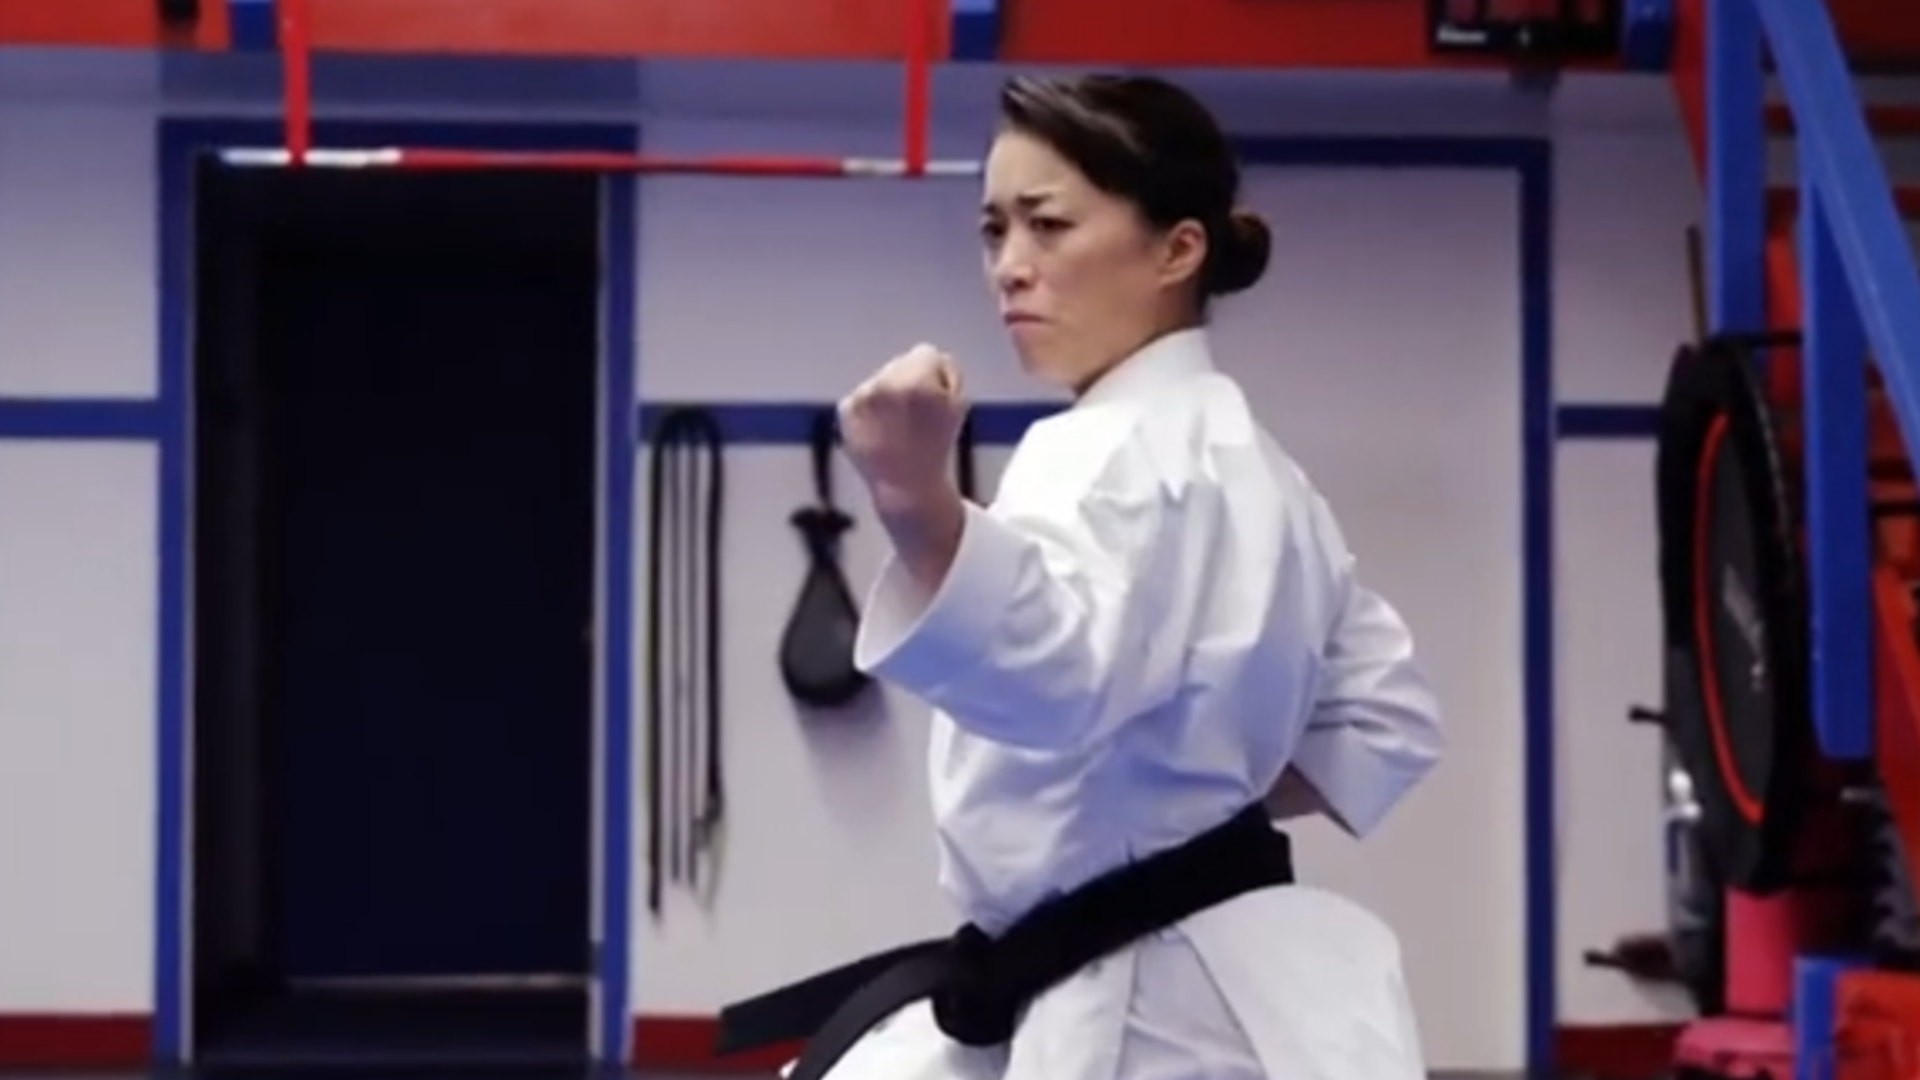 Kokumai has Japanese roots, making her a perfect fit to represent America in karate at the Tokyo Olympics.